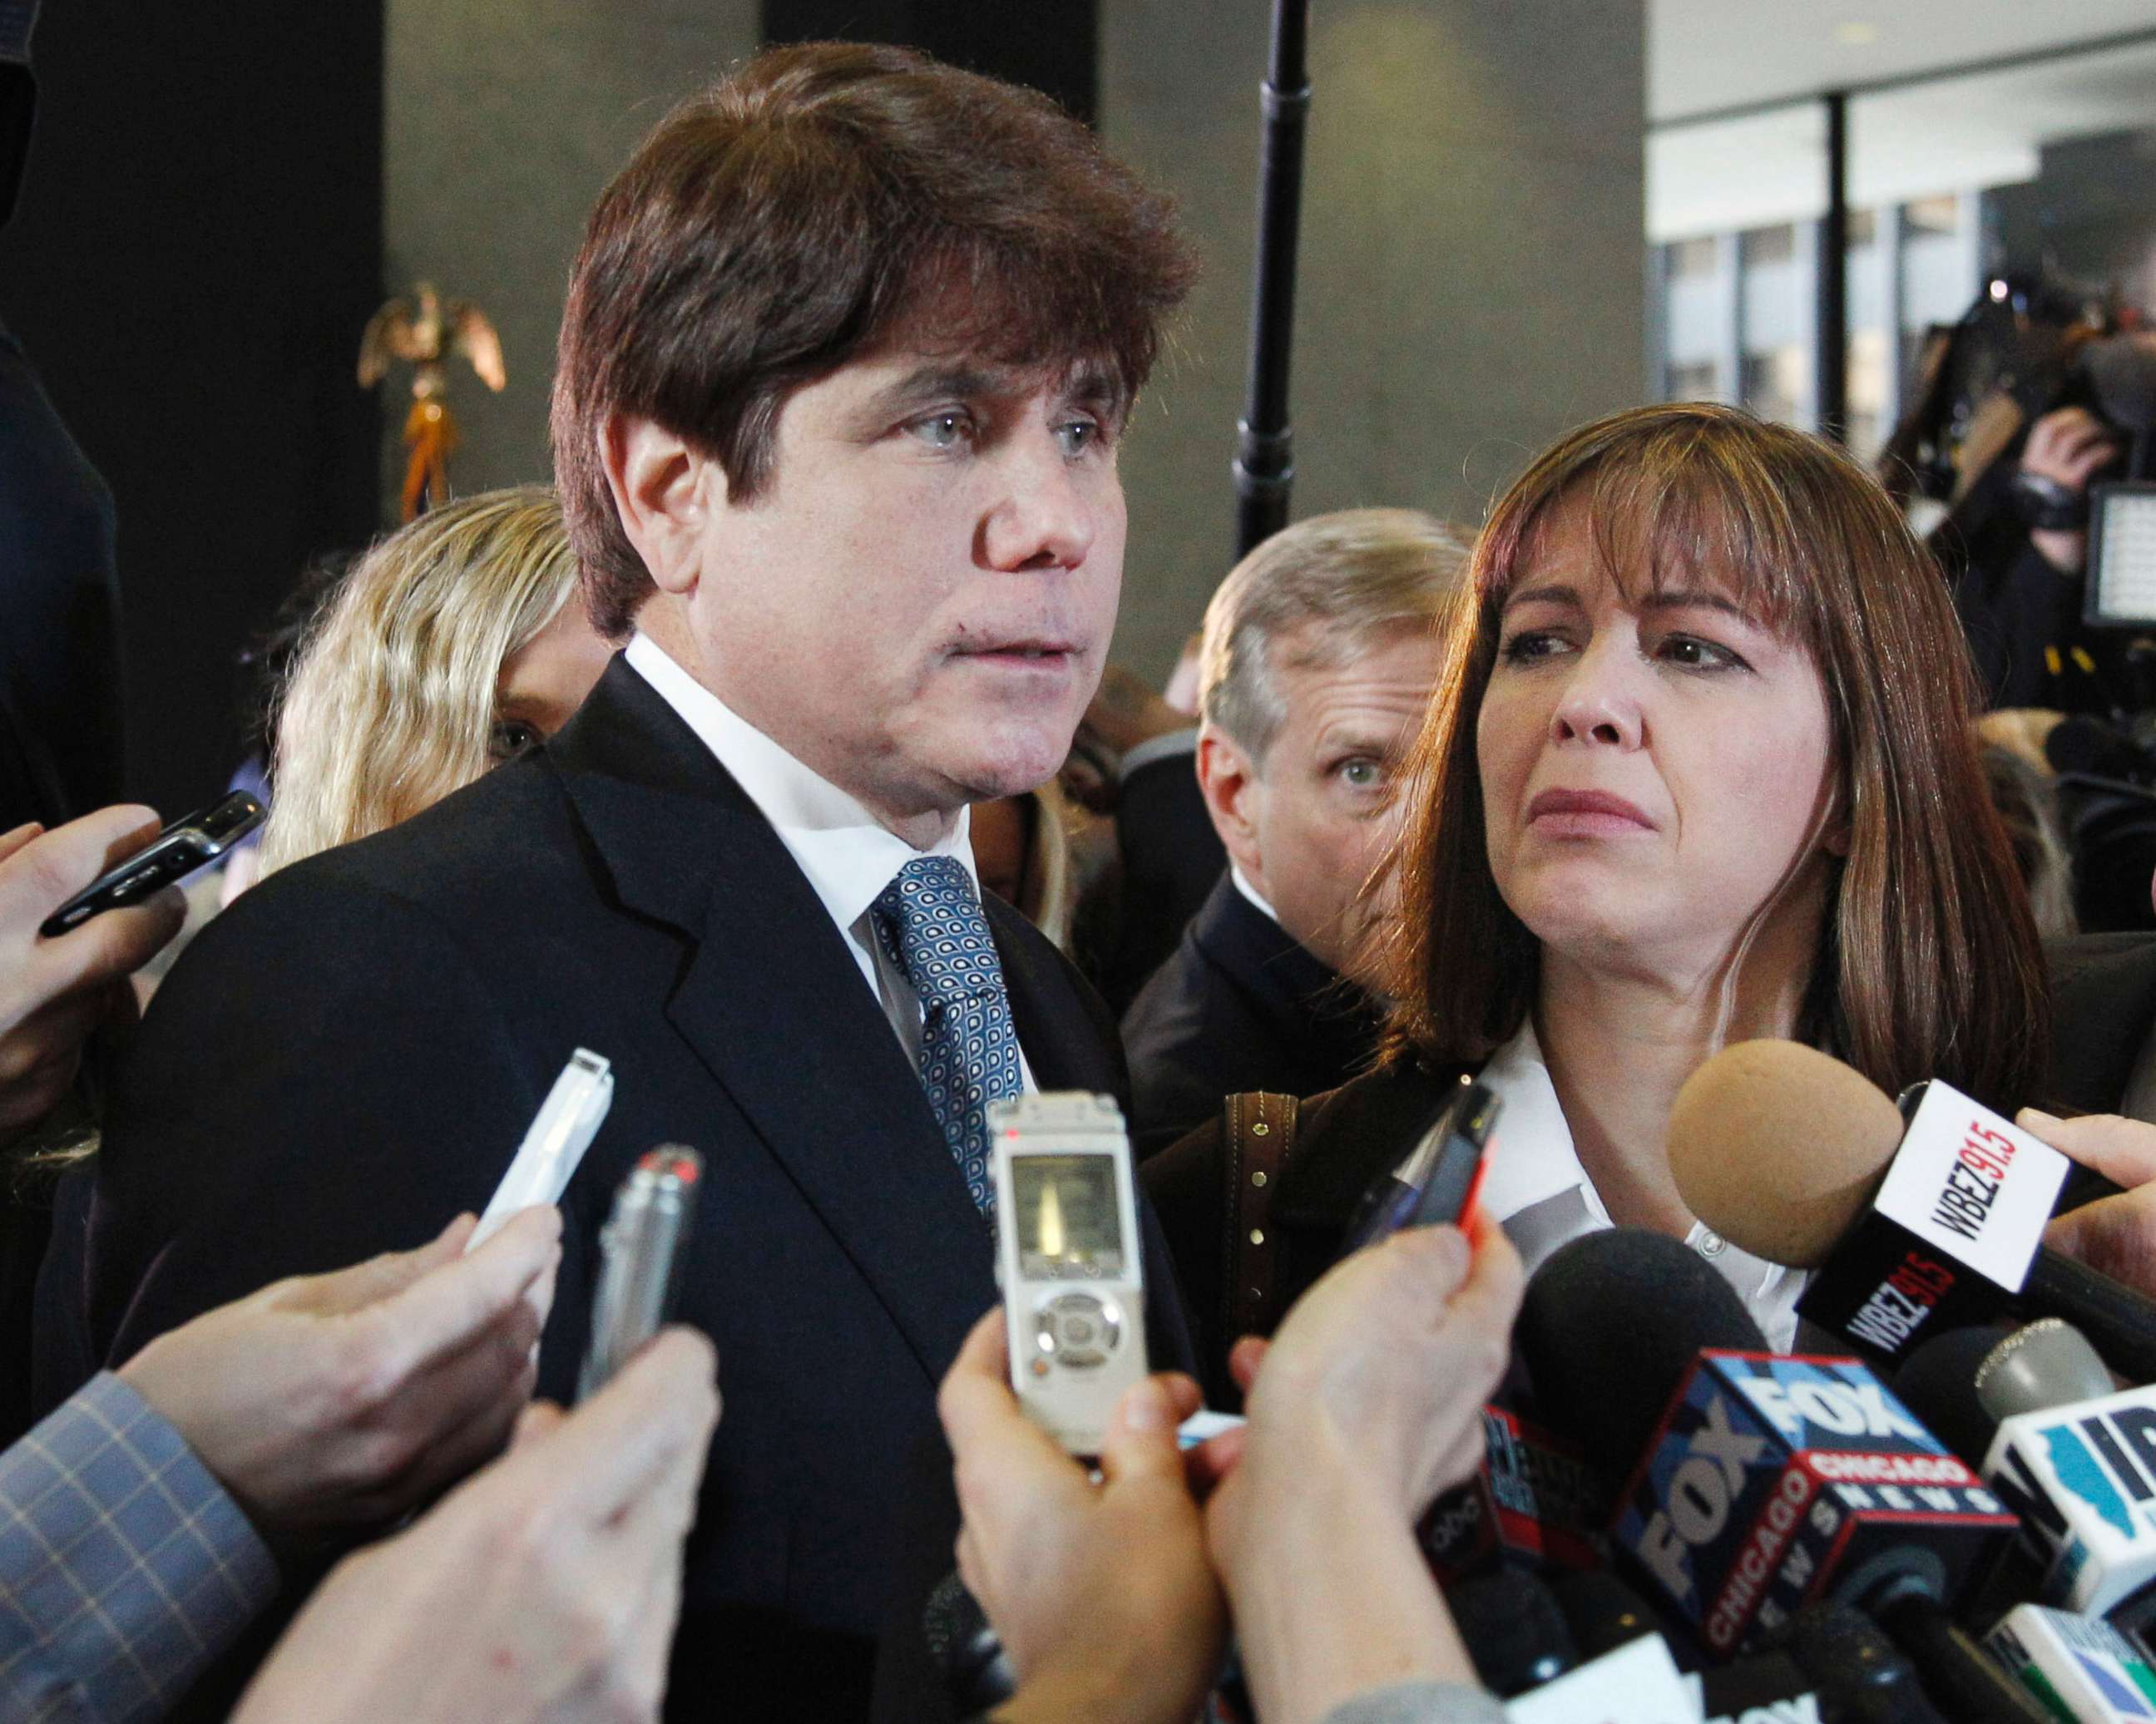 In this Dec. 7, 2011 file photo, former Illinois Gov. Rod Blagojevich speaks to reporters as his wife, Patti, listens at the federal building in Chicago.